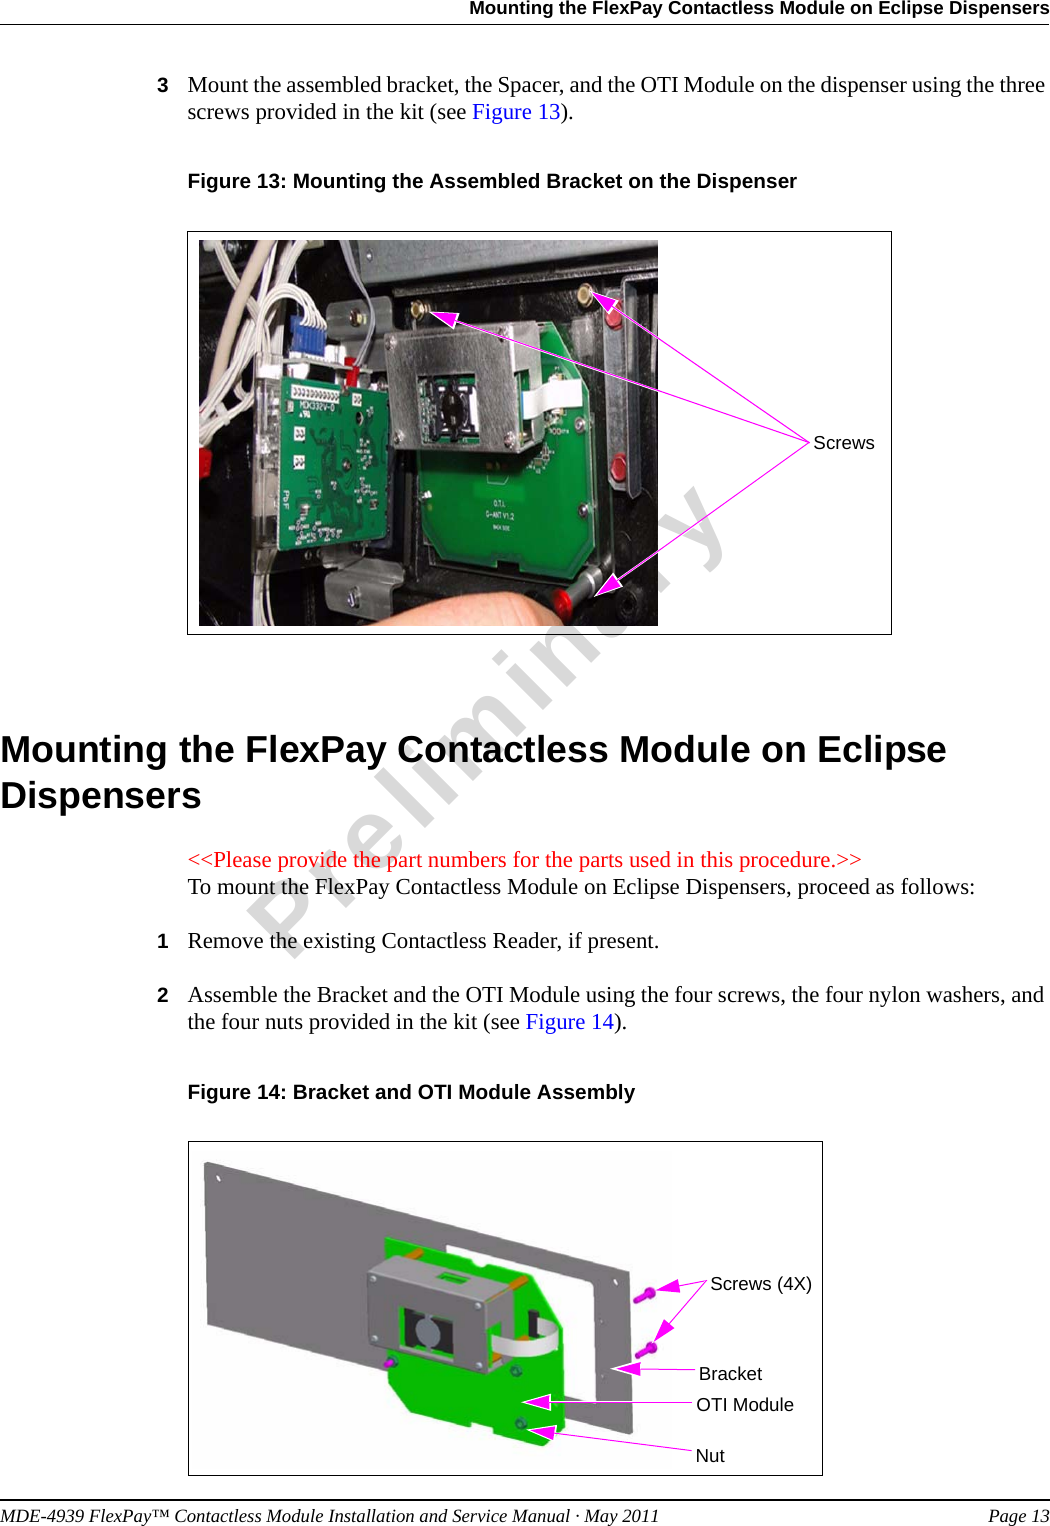 MDE-4939 FlexPay™ Contactless Module Installation and Service Manual · May 2011 Page 13Mounting the FlexPay Contactless Module on Eclipse DispensersPreliminary3Mount the assembled bracket, the Spacer, and the OTI Module on the dispenser using the three screws provided in the kit (see Figure 13).Figure 13: Mounting the Assembled Bracket on the DispenserScrewsMounting the FlexPay Contactless Module on Eclipse Dispensers&lt;&lt;Please provide the part numbers for the parts used in this procedure.&gt;&gt;To mount the FlexPay Contactless Module on Eclipse Dispensers, proceed as follows:1Remove the existing Contactless Reader, if present.2Assemble the Bracket and the OTI Module using the four screws, the four nylon washers, and the four nuts provided in the kit (see Figure 14).Figure 14: Bracket and OTI Module AssemblyBracketNutOTI ModuleScrews (4X)